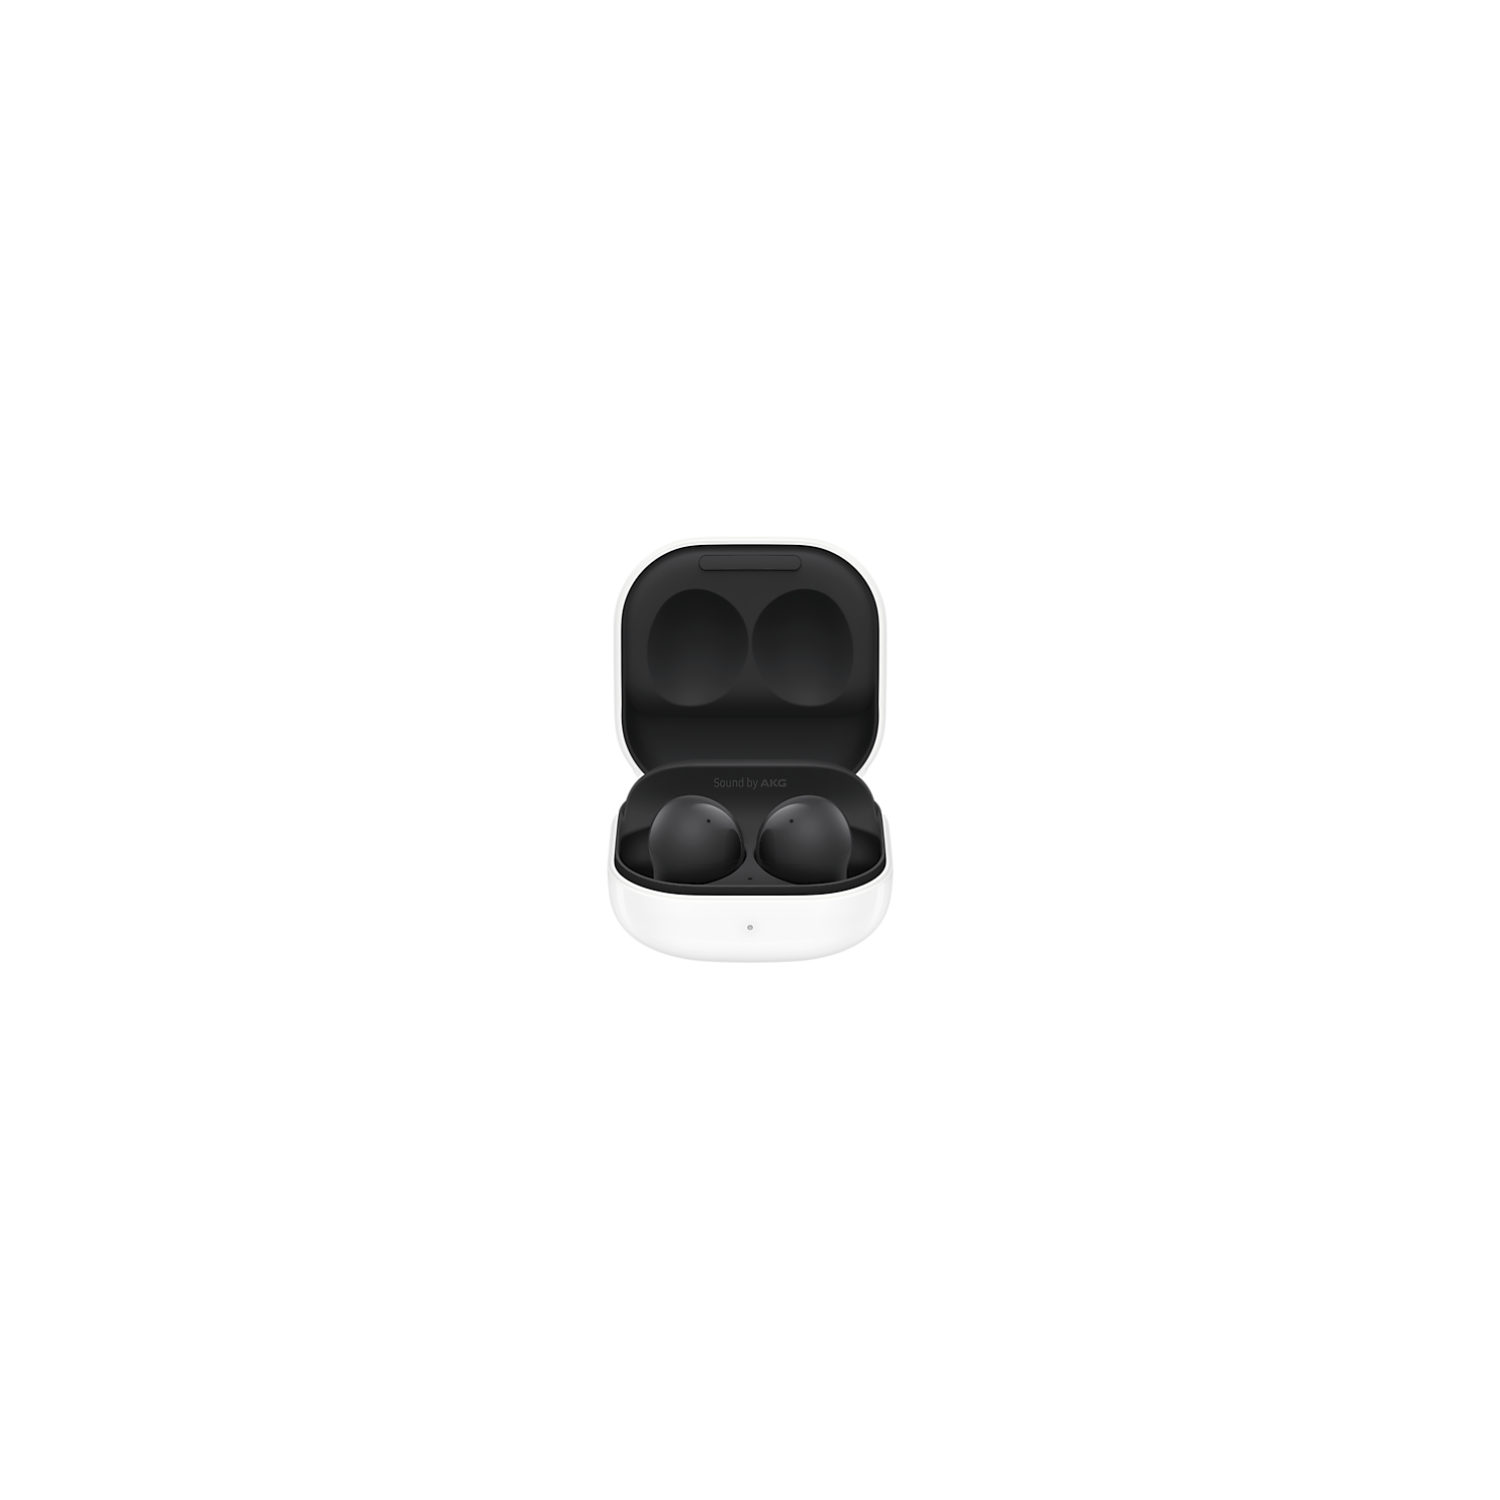 Samsung Galaxy Buds2 In-Ear Noise Cancelling Truly Wireless Headphones - Black - Refurbished